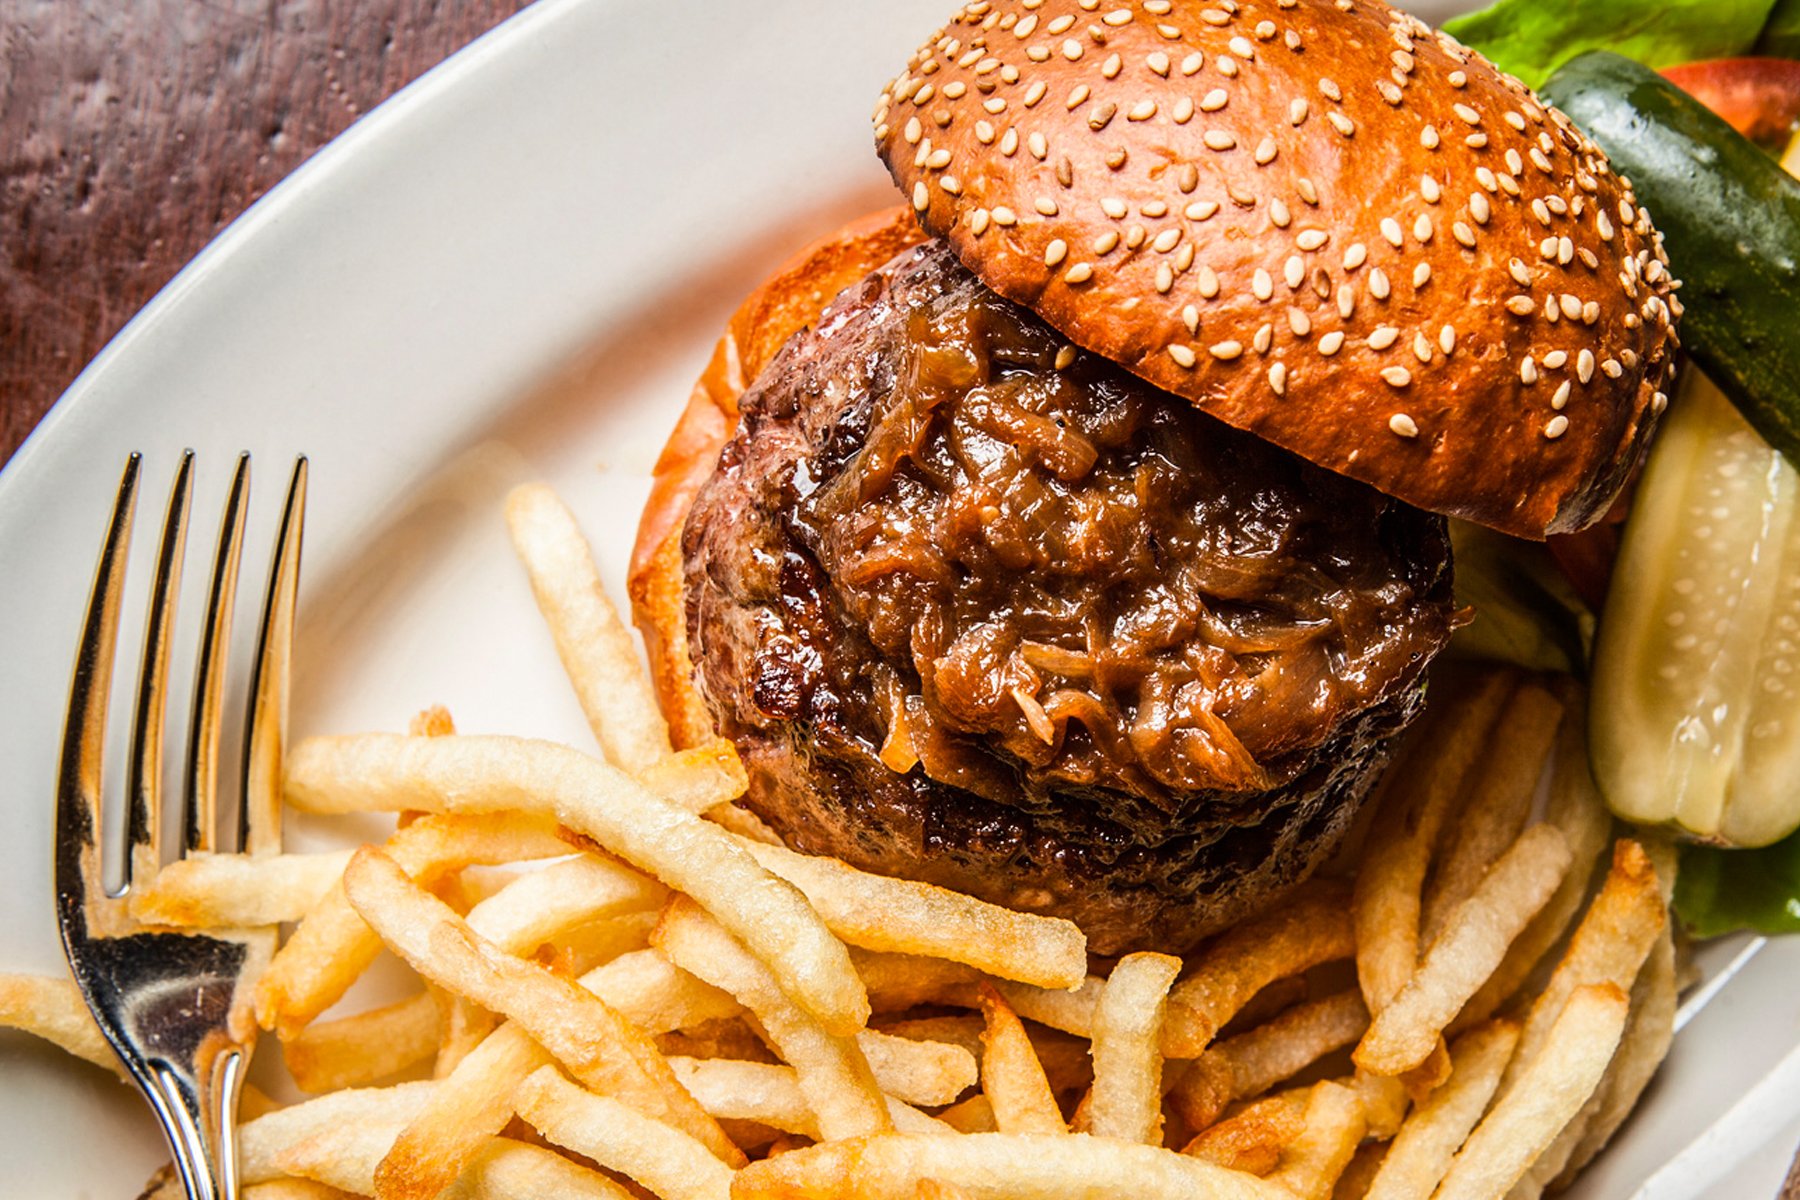 The Black Label Burger, a $33 masterpiece, is an assemblage of dry-aged rib eye, skirt steak, and brisket, courtesy of the renowned Pat La Frieda meat company.